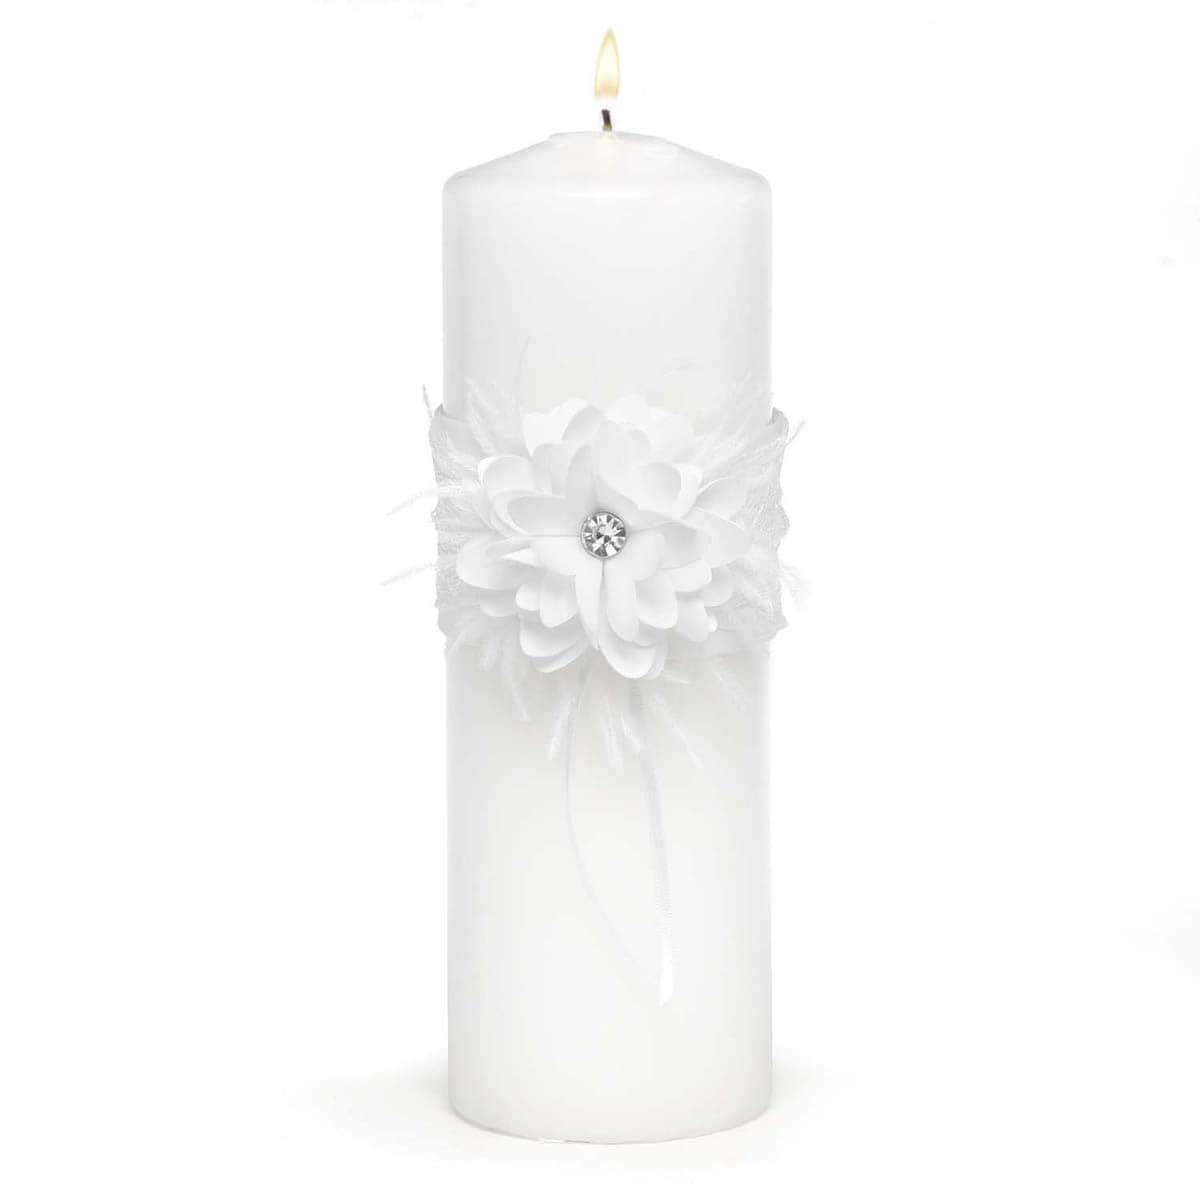 Layers Of Lace White Unity Candle